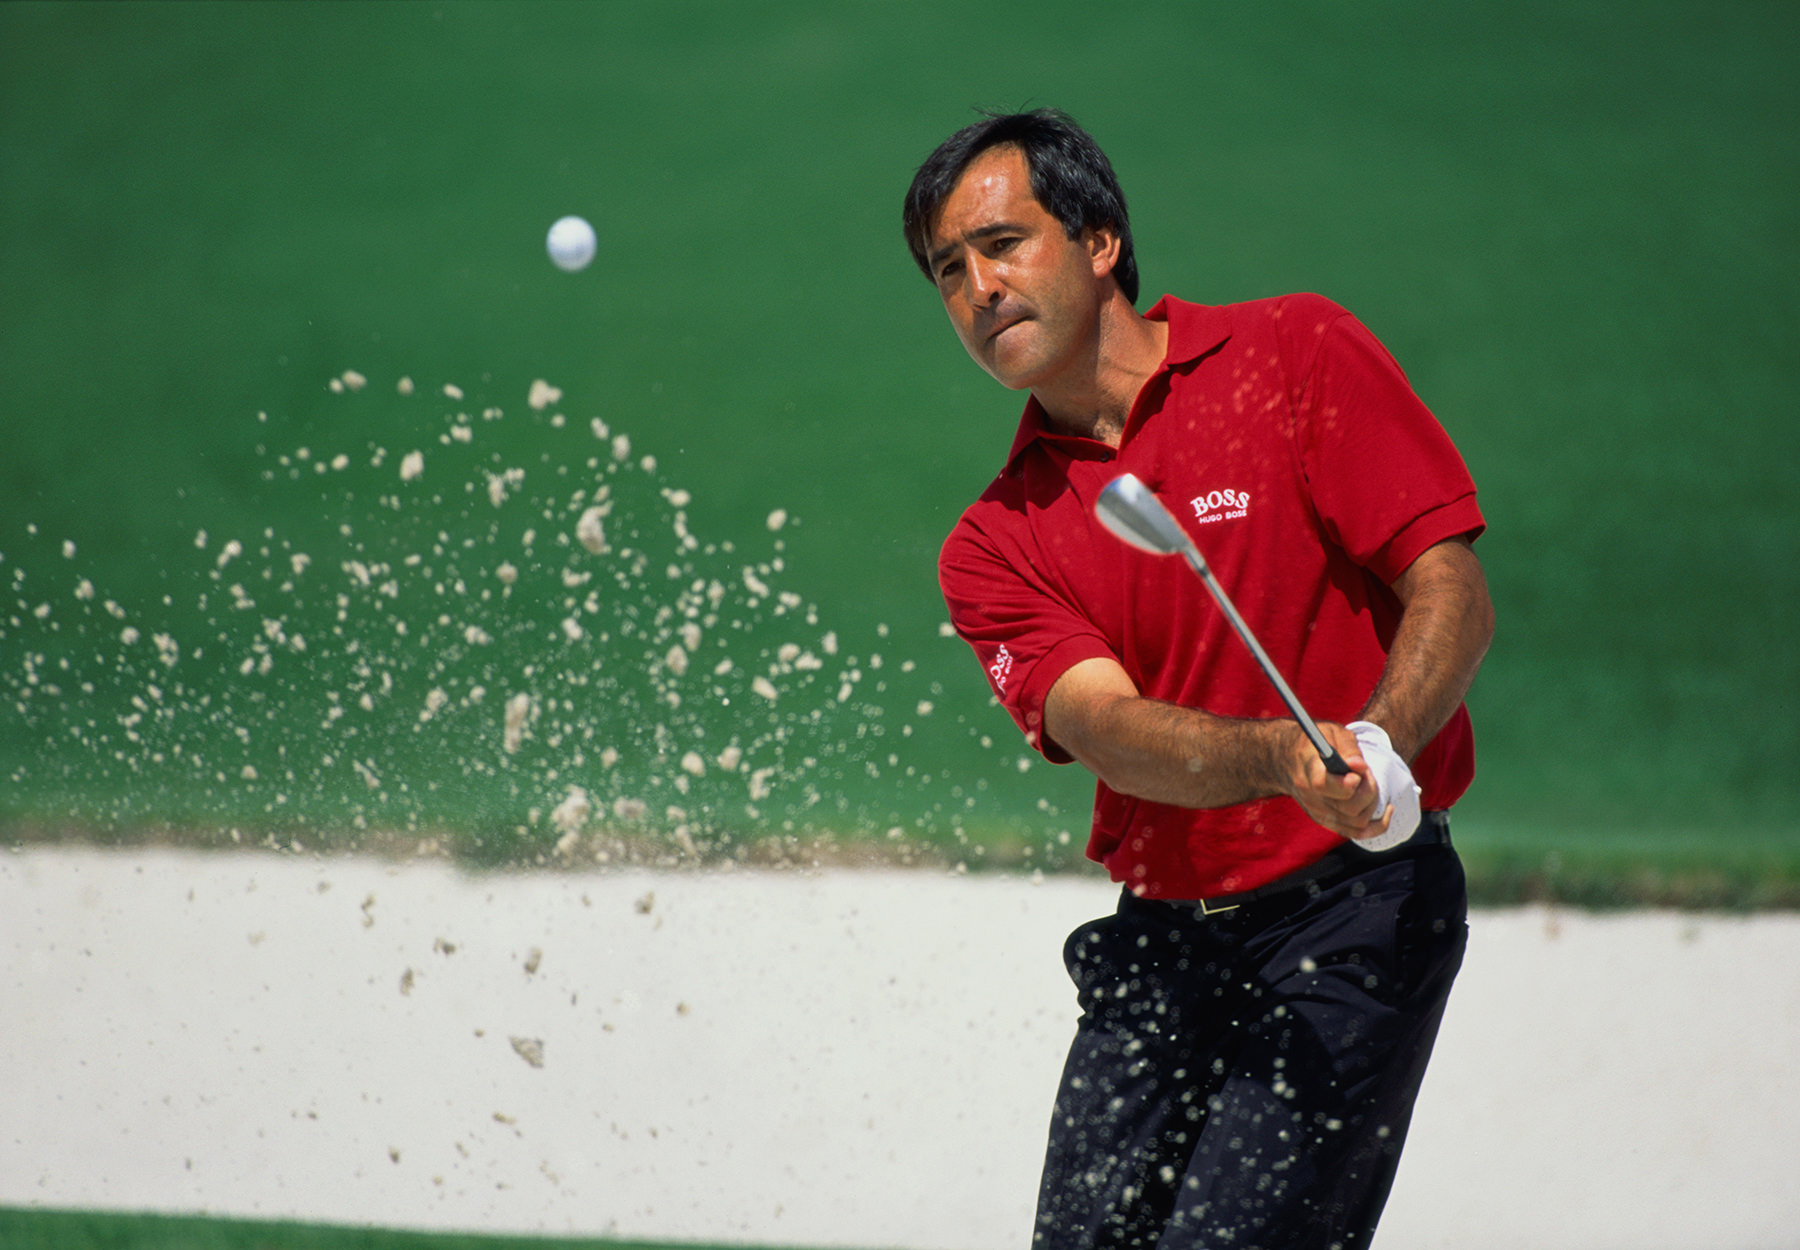 In pictures: The genius of Seve Ballesteros